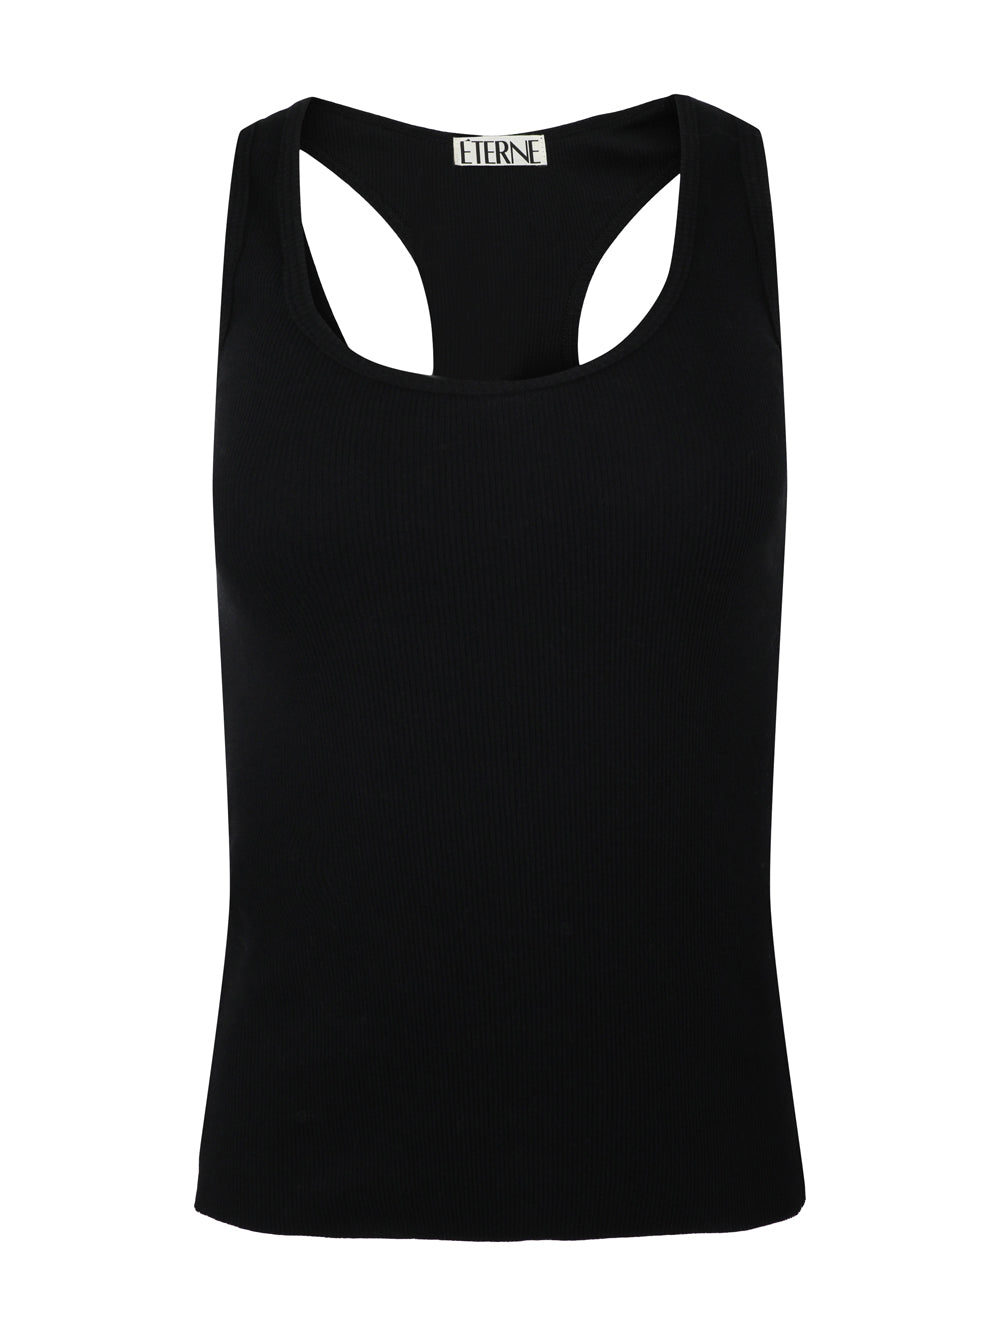 Women Tank Top racerback 100% Cotton Available in S, M and L